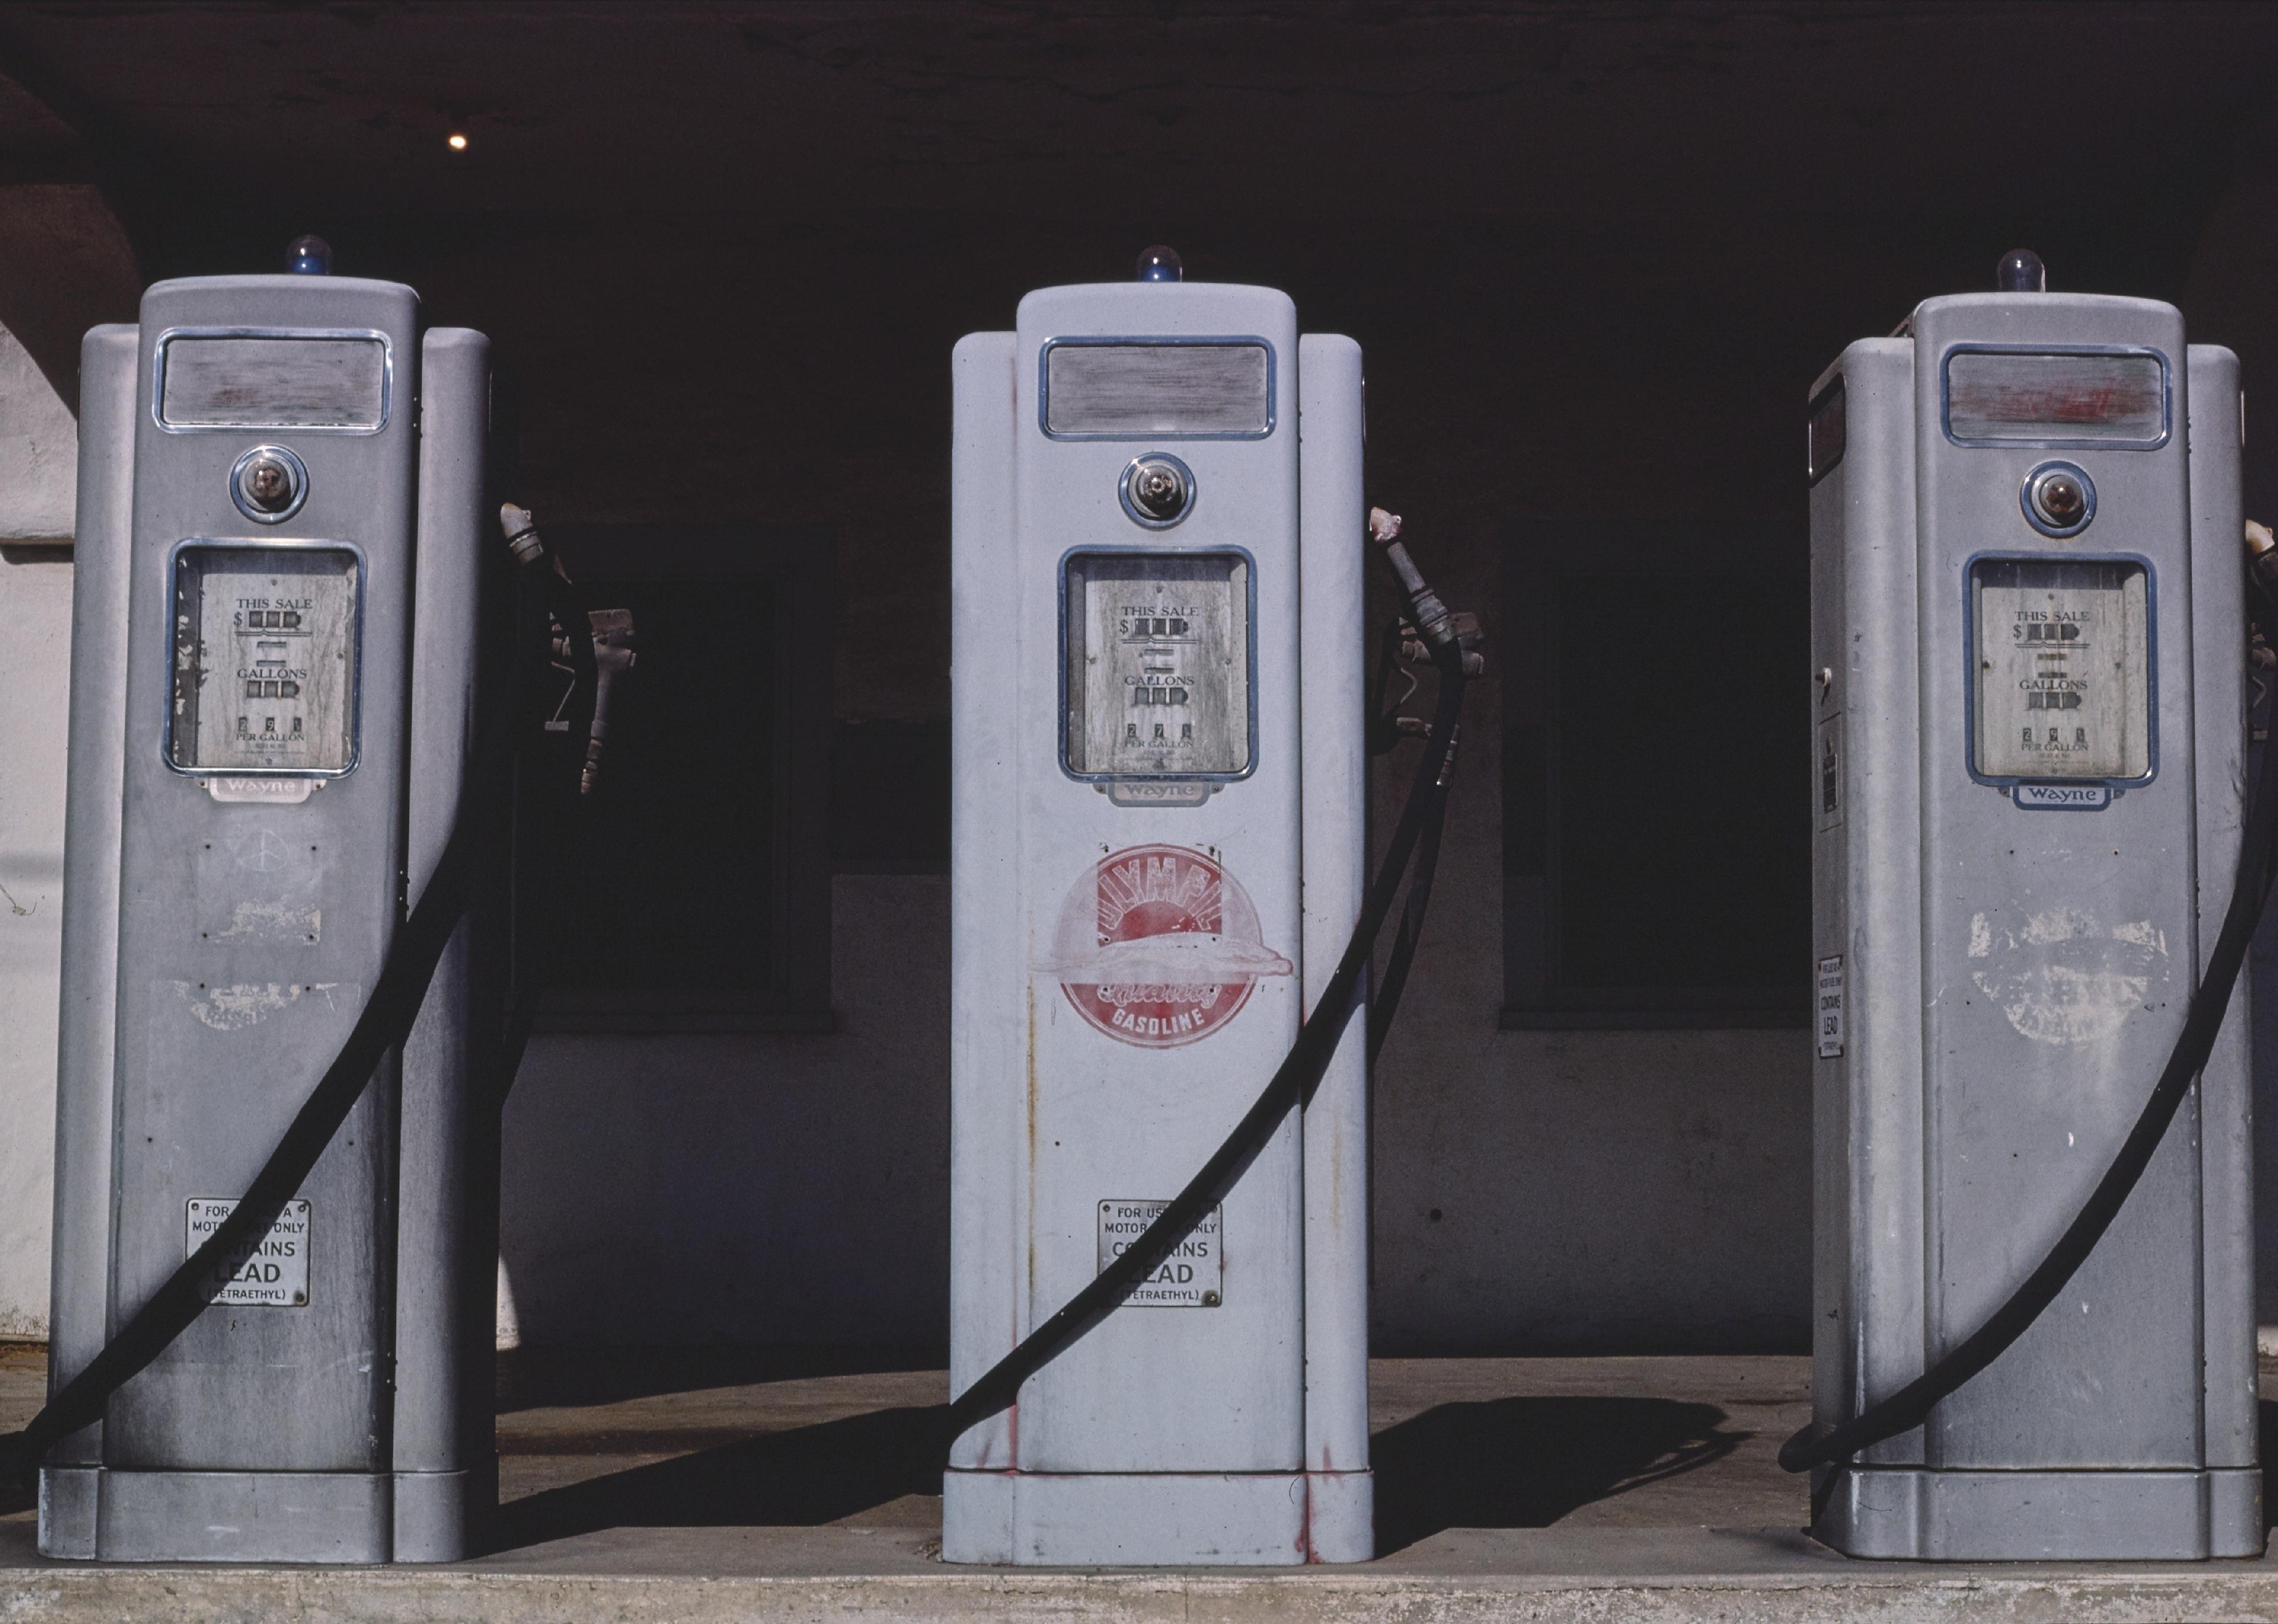 Olympic Gas Pumps in San Diego in 1978.